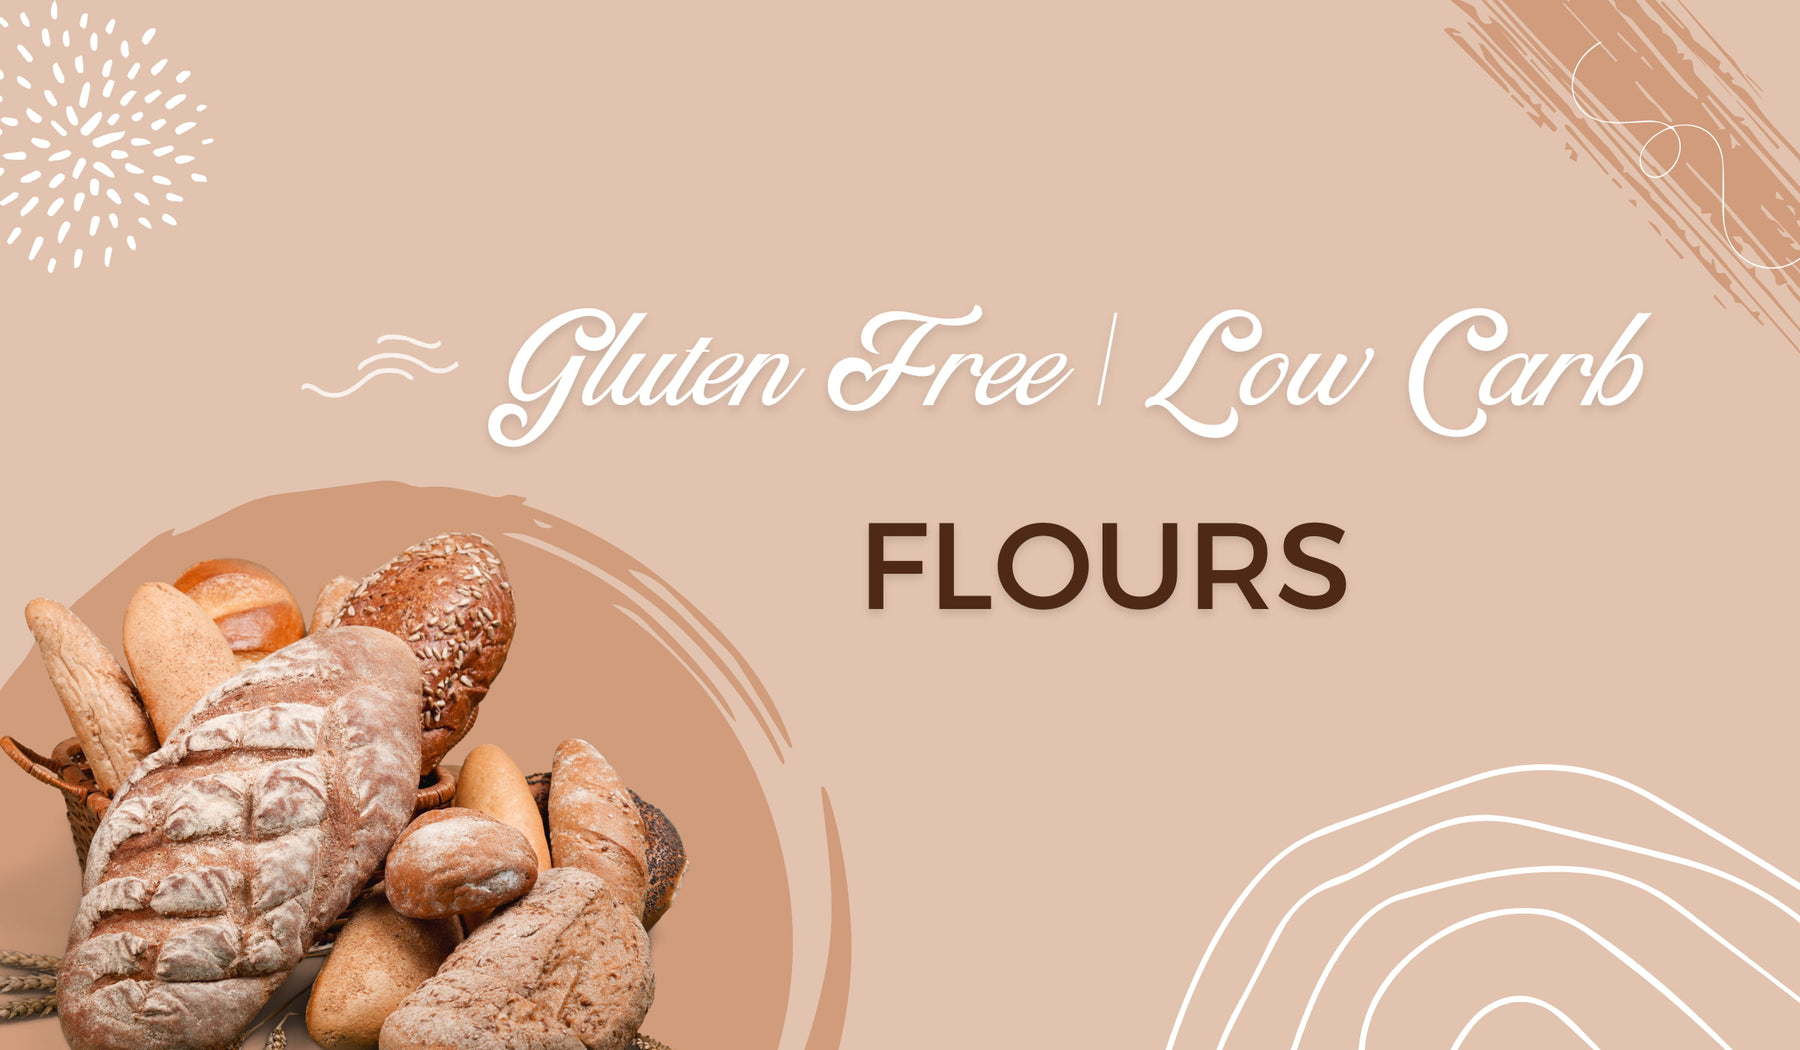 Low Carb & Gluten Free Flour Alternatives for Baking